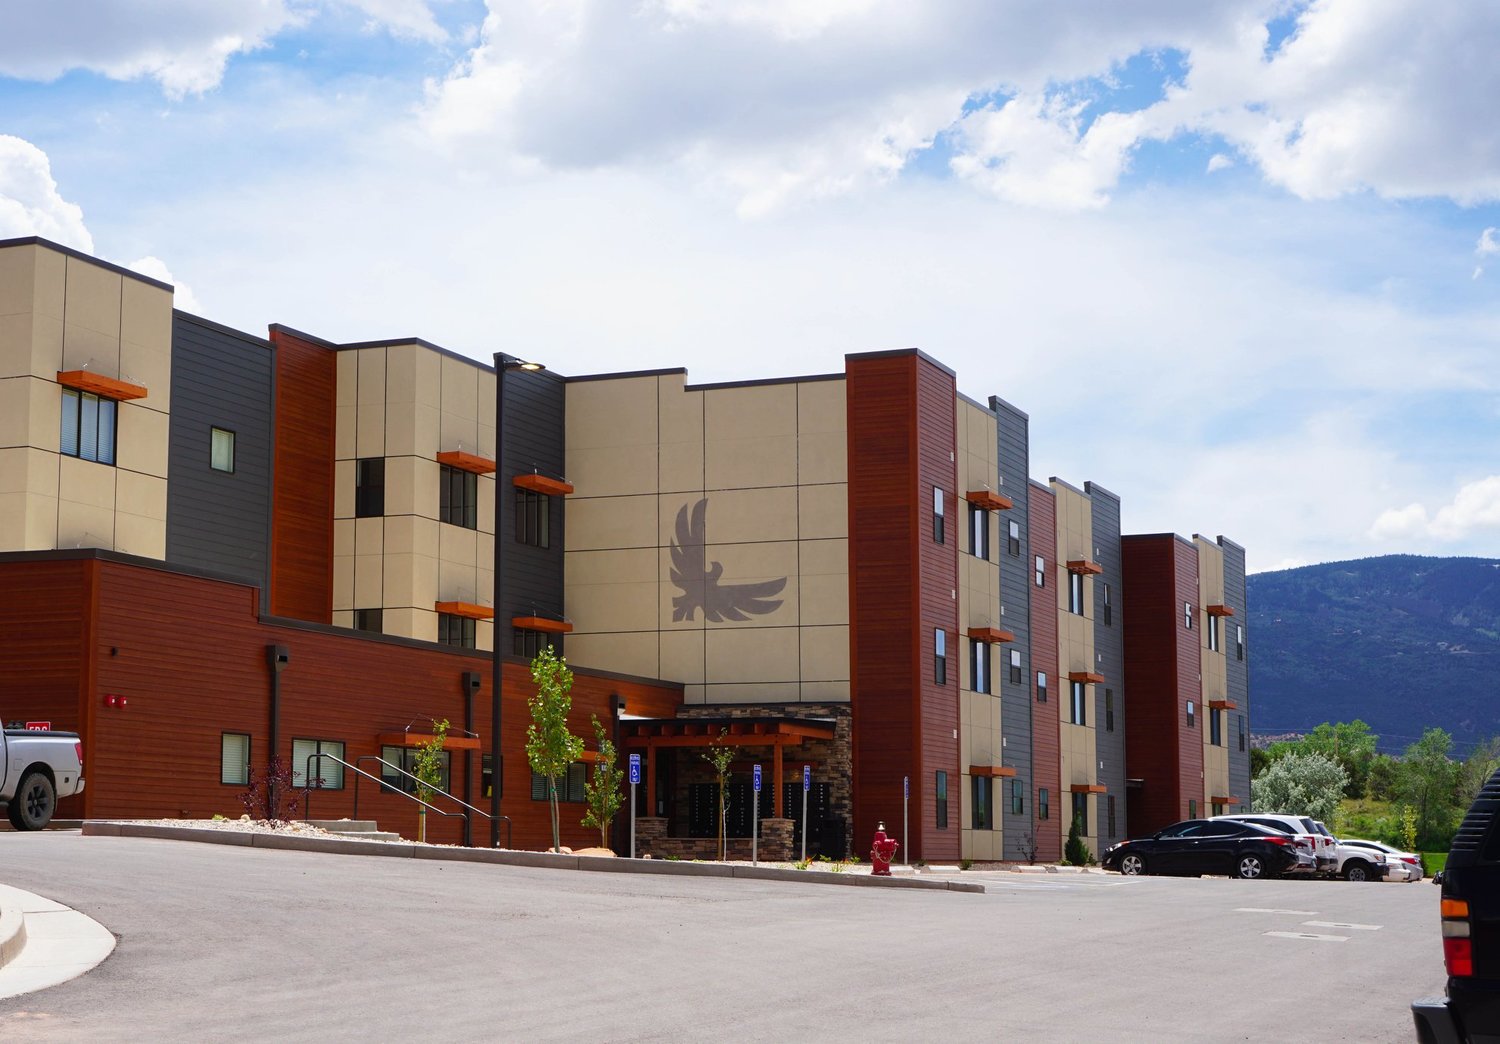 The Libertad development in Cedar City, Utah, is among affordable housing projects take on by The Vecino Group.